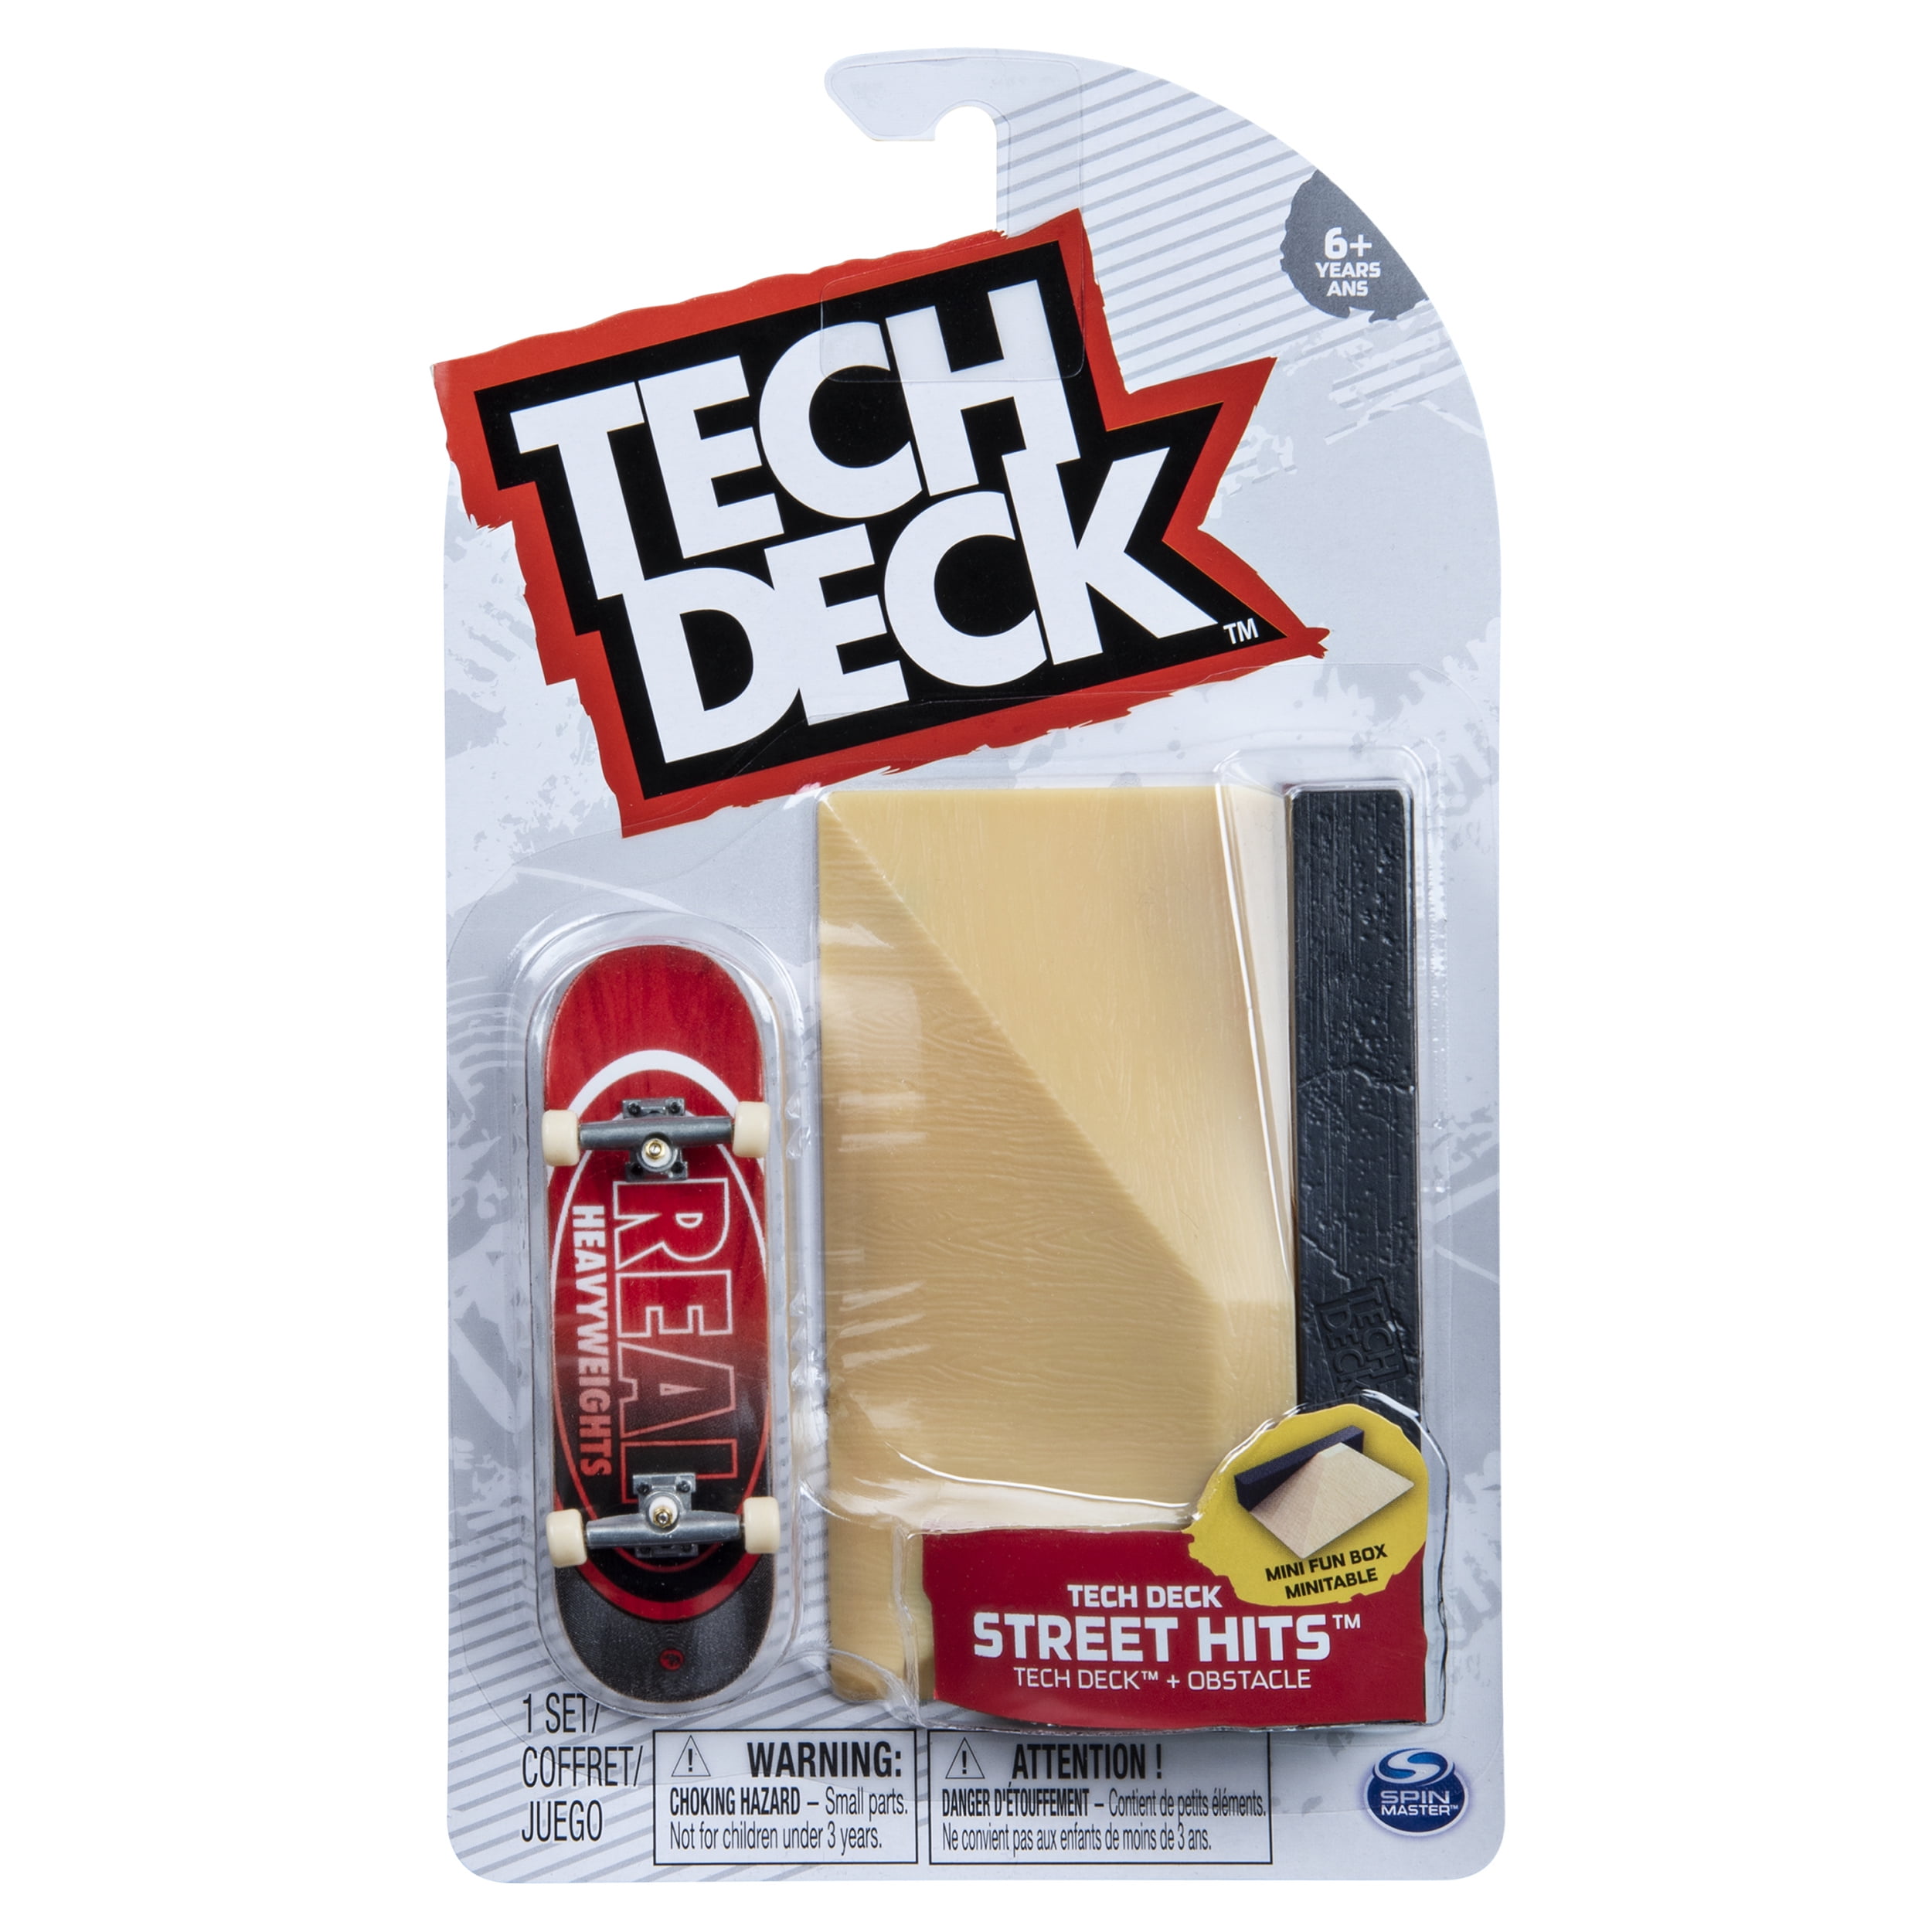 2020 Tech Deck Street Hits Blind Skate Fingerboard Obstacle Picnic Table for sale online